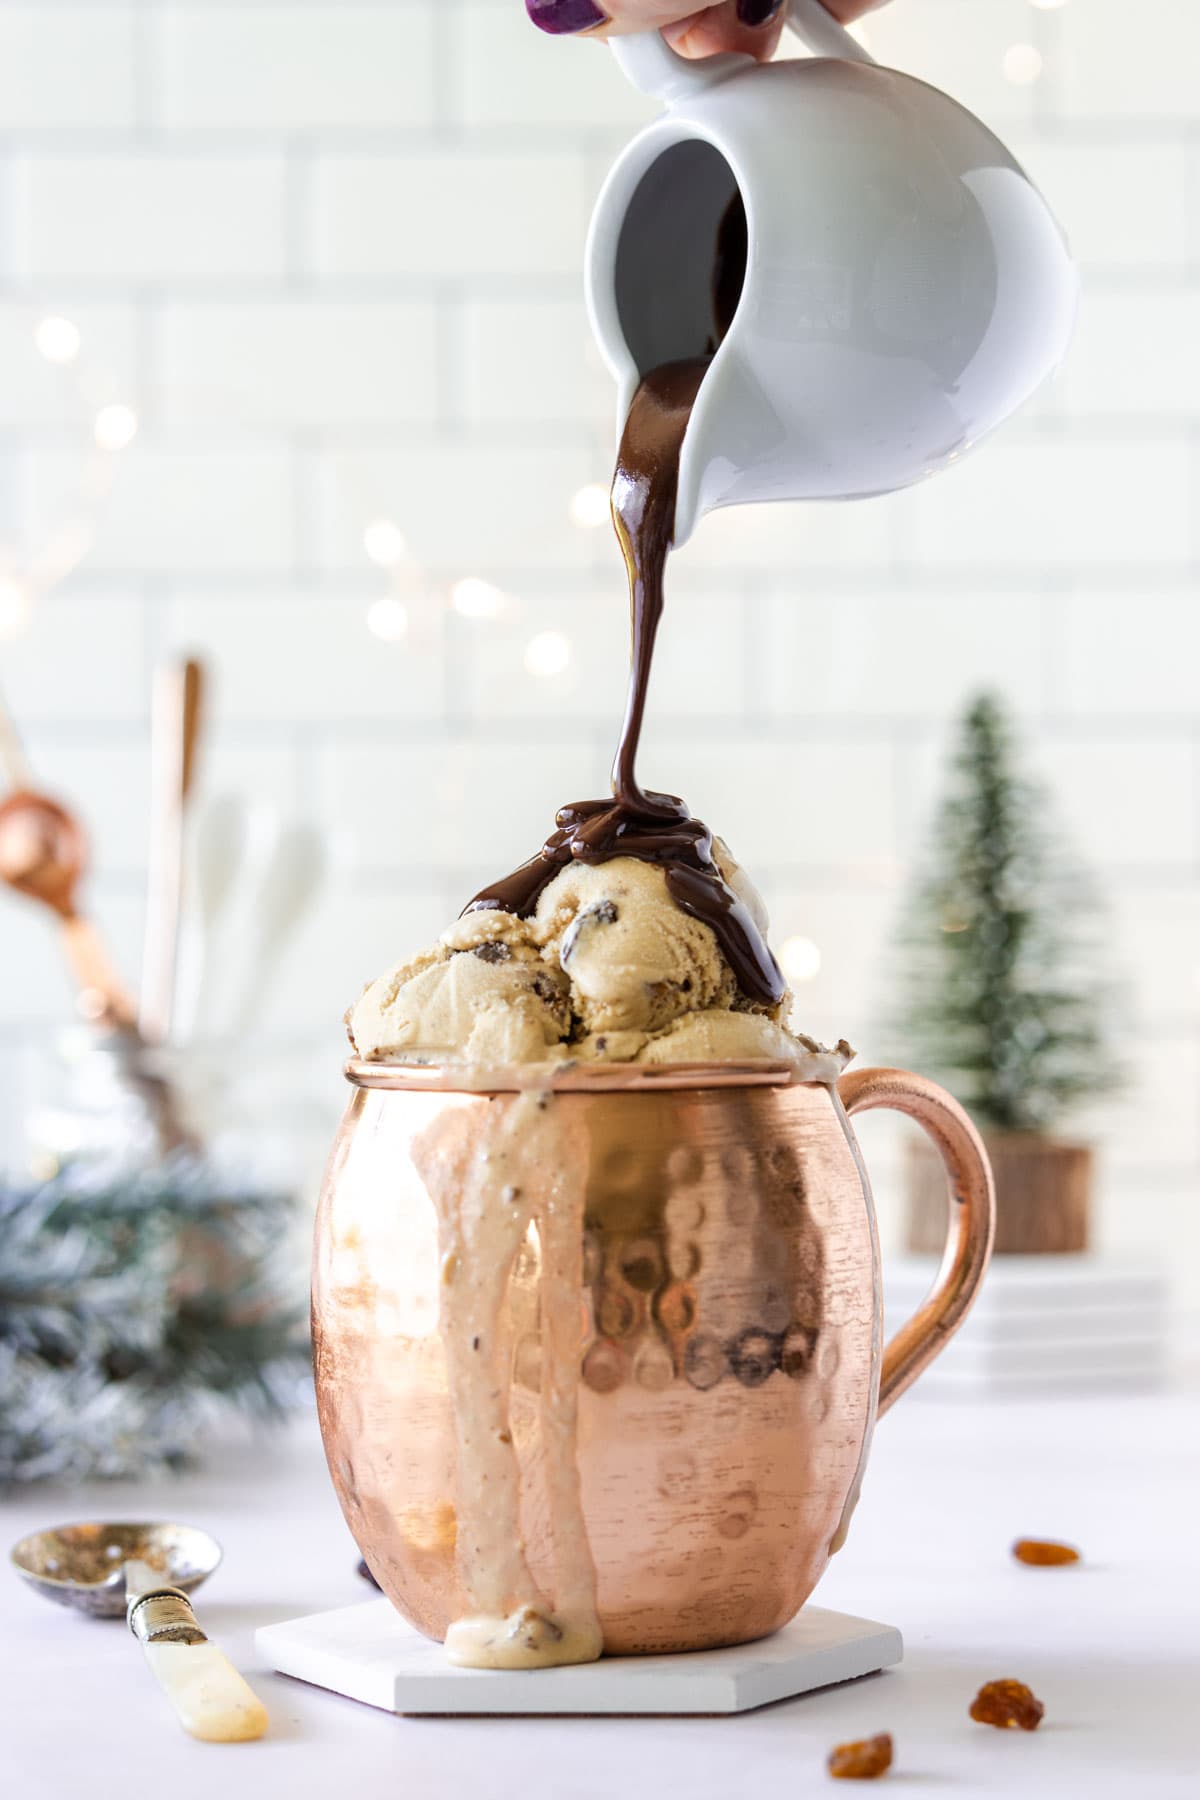 White jug pouring chocolate sauce over the top of ice cream in a copper mug